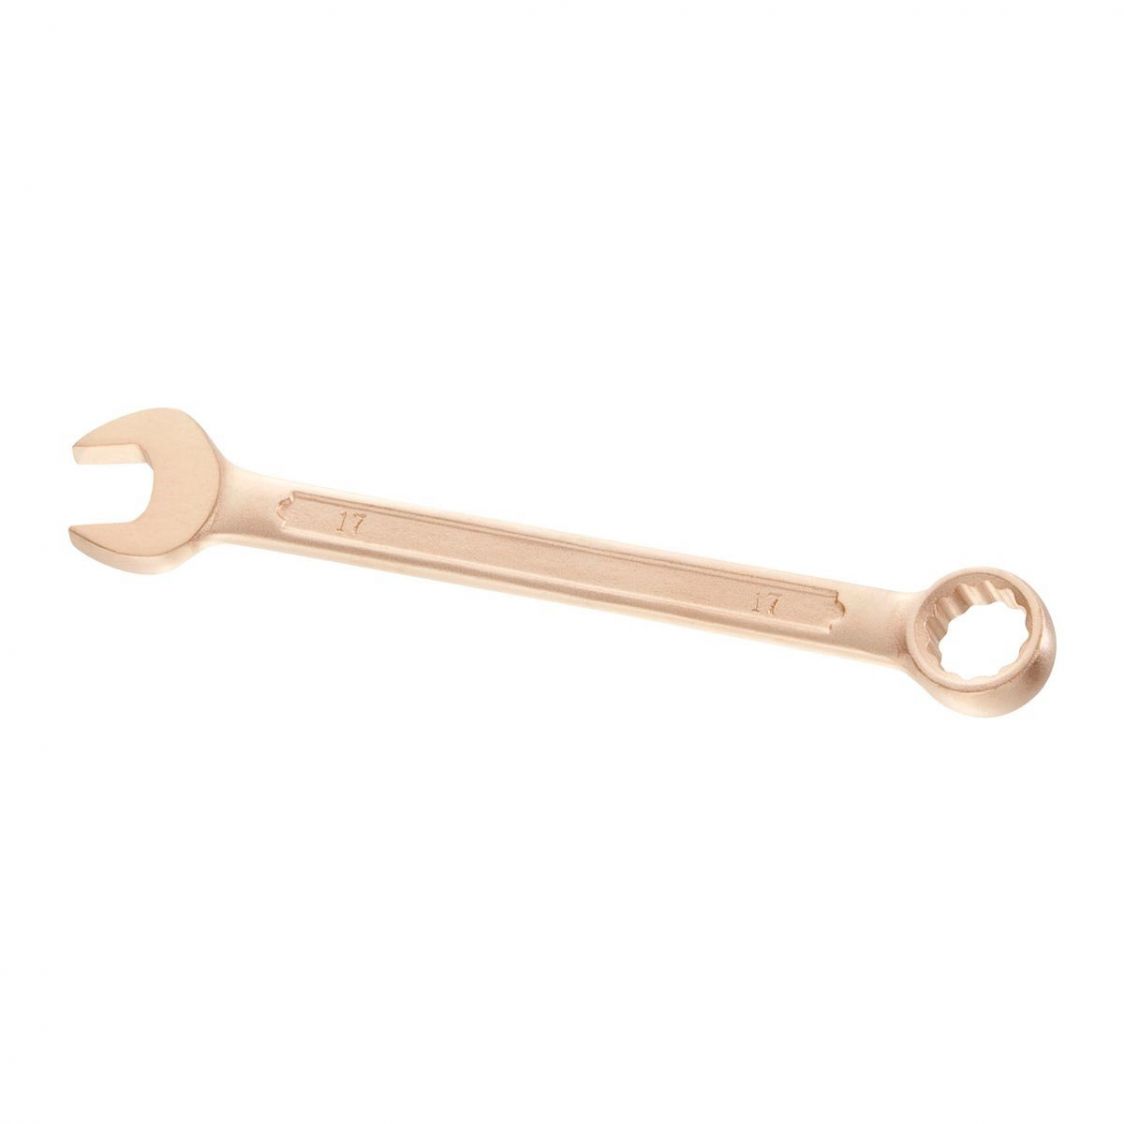 FACOM 440.XSRM - Non-Sparking Metric Combination Spanner